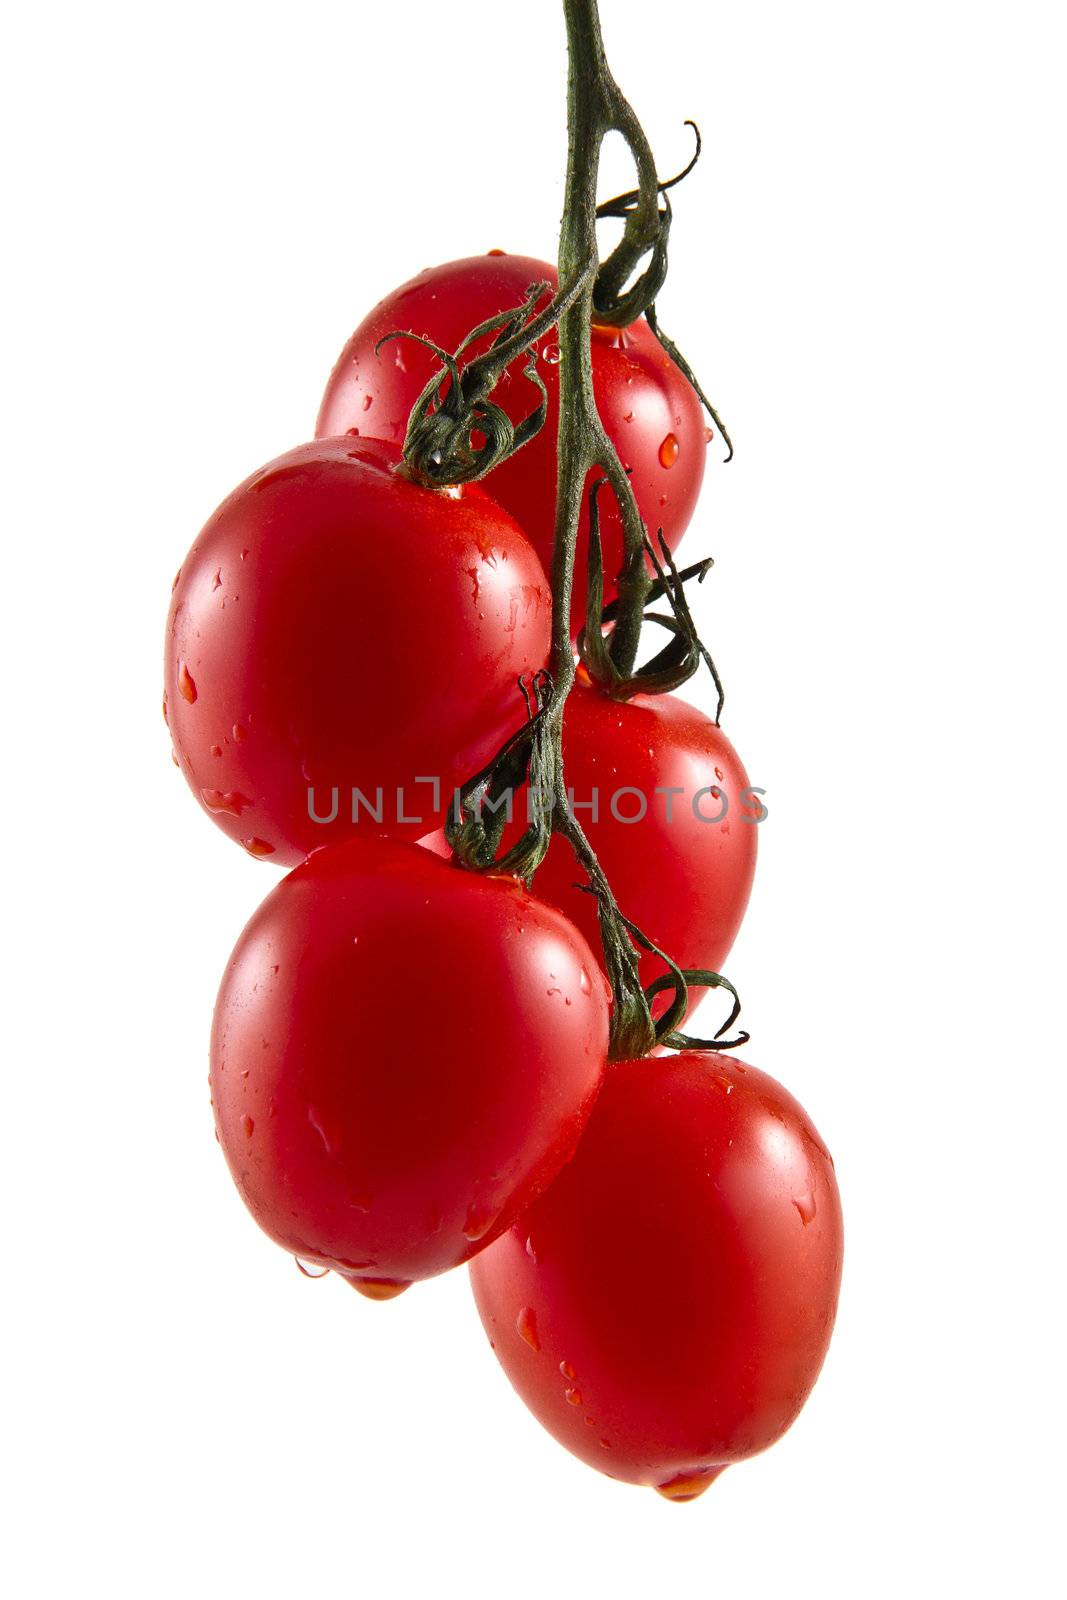 Hanging truss of five fresh vine tomatoes isolated on white background